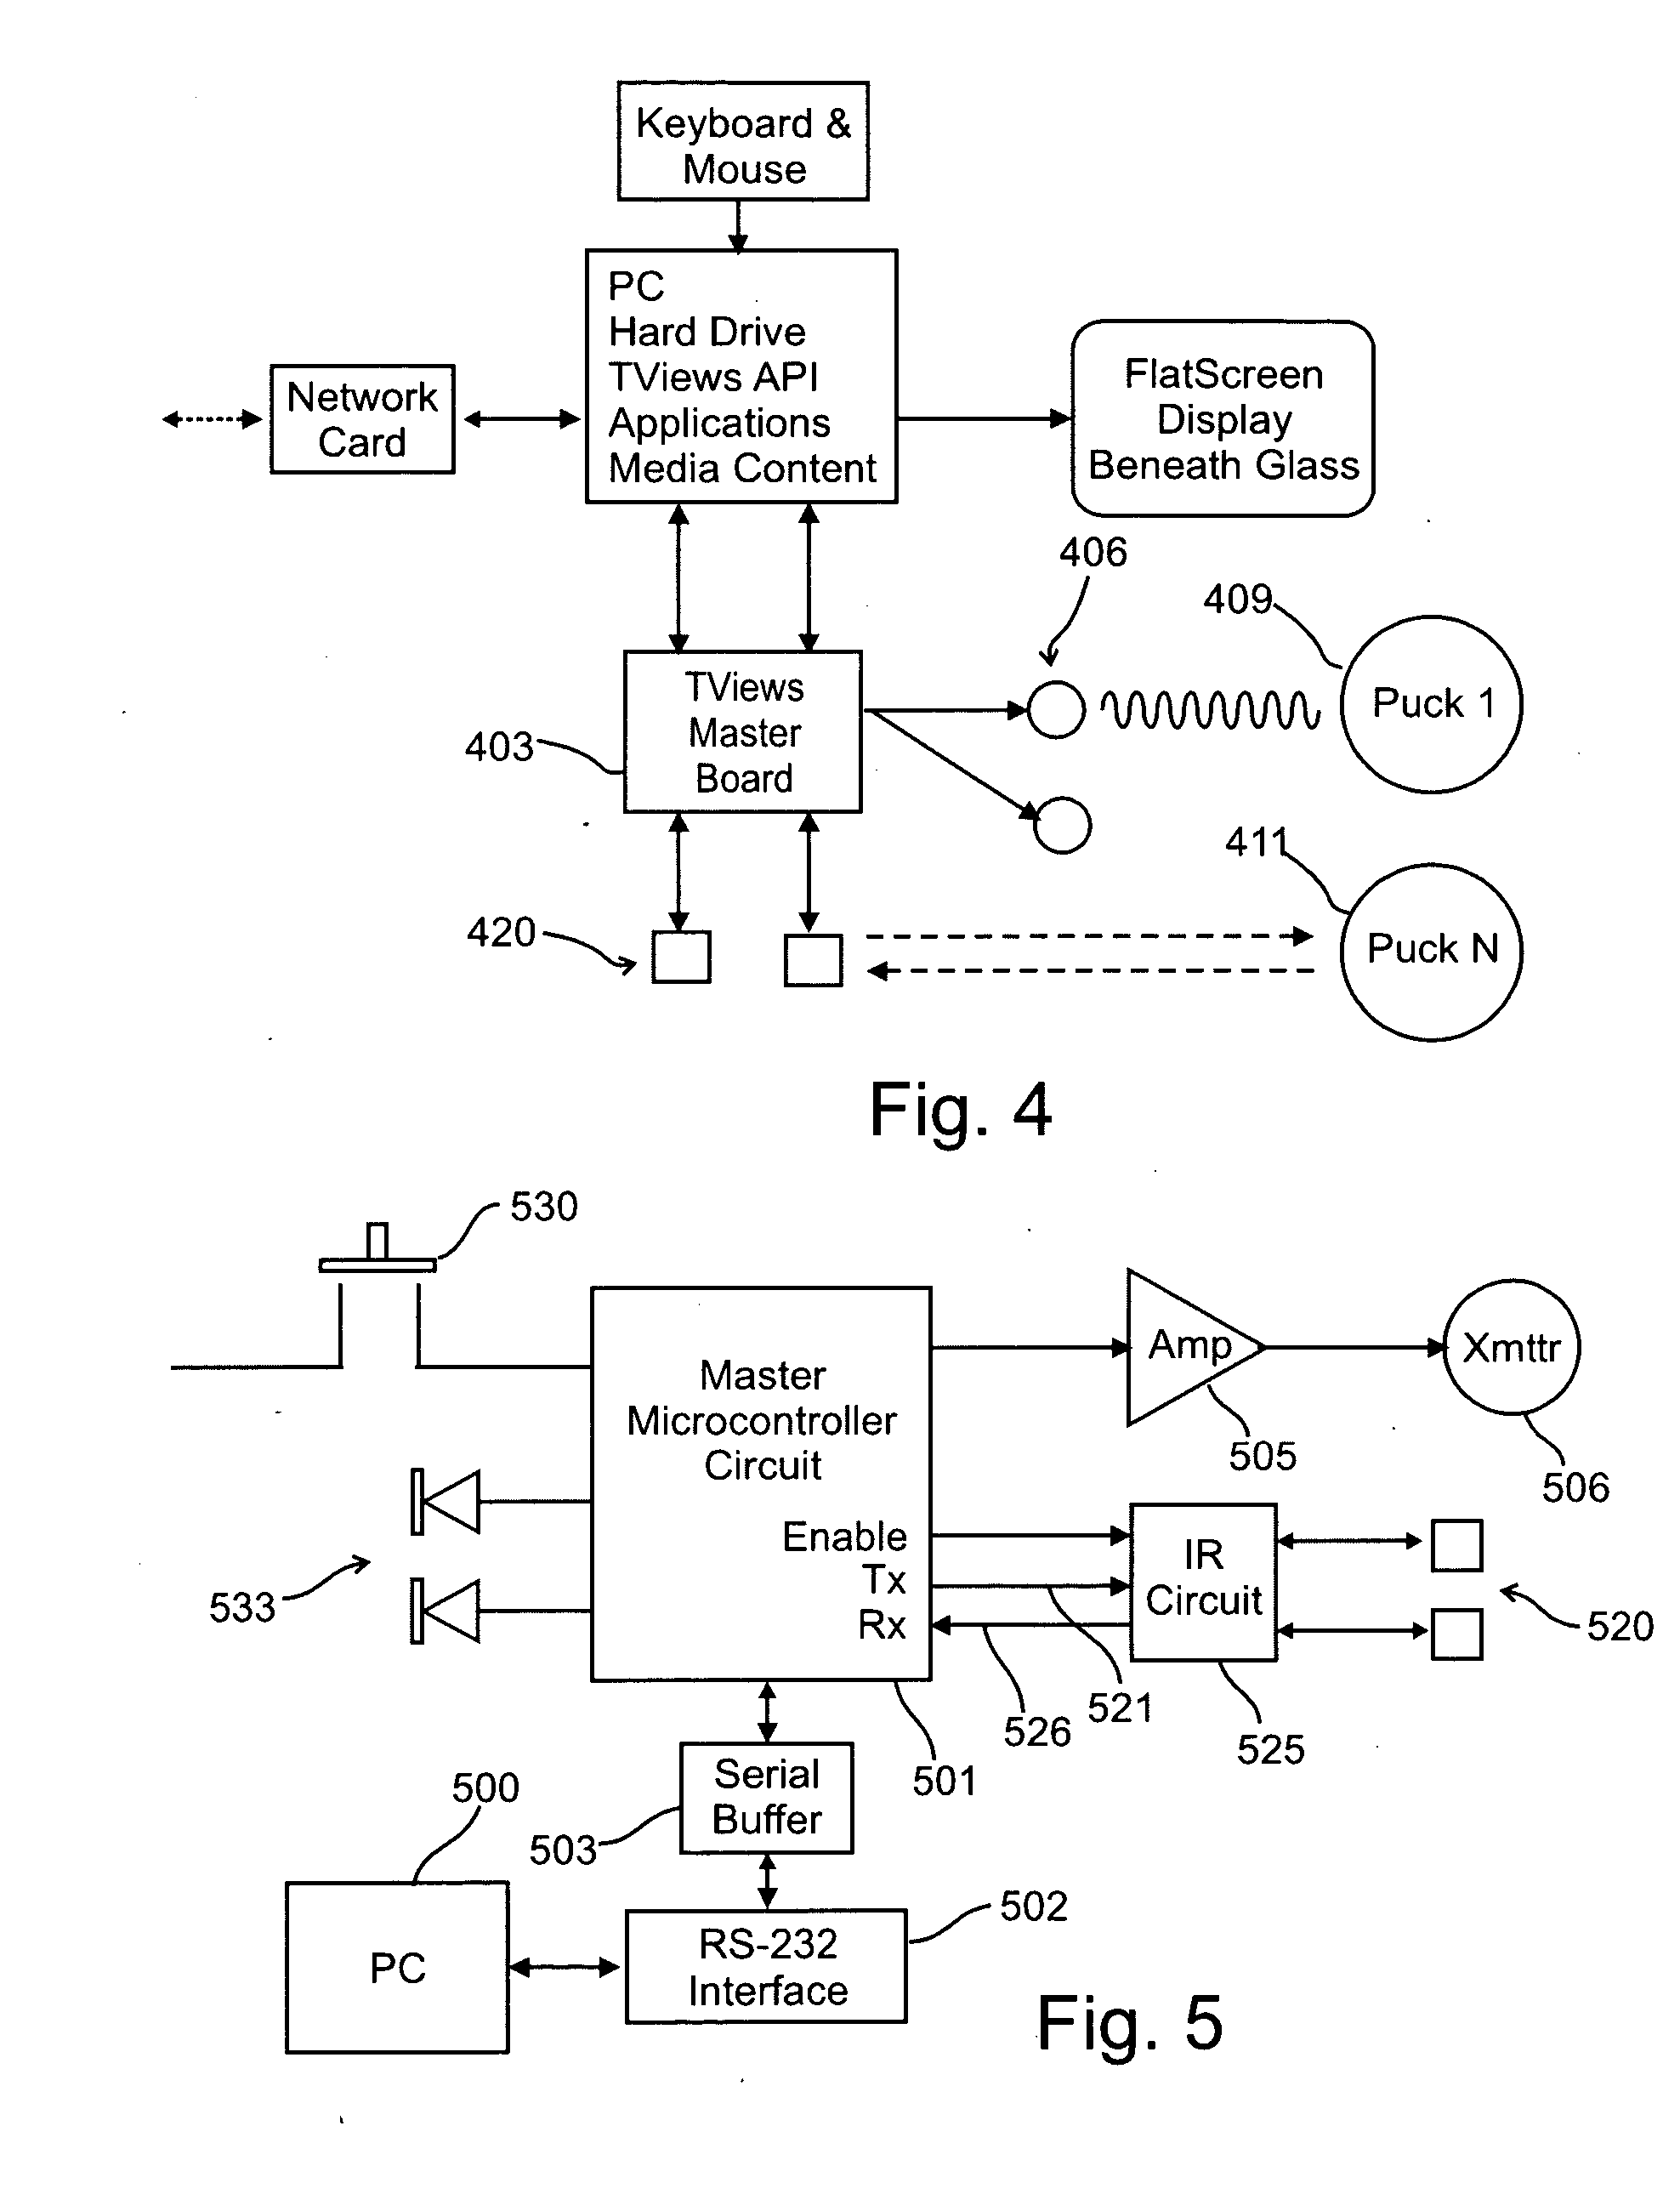 Method for object identification and sensing in a bounded interaction space